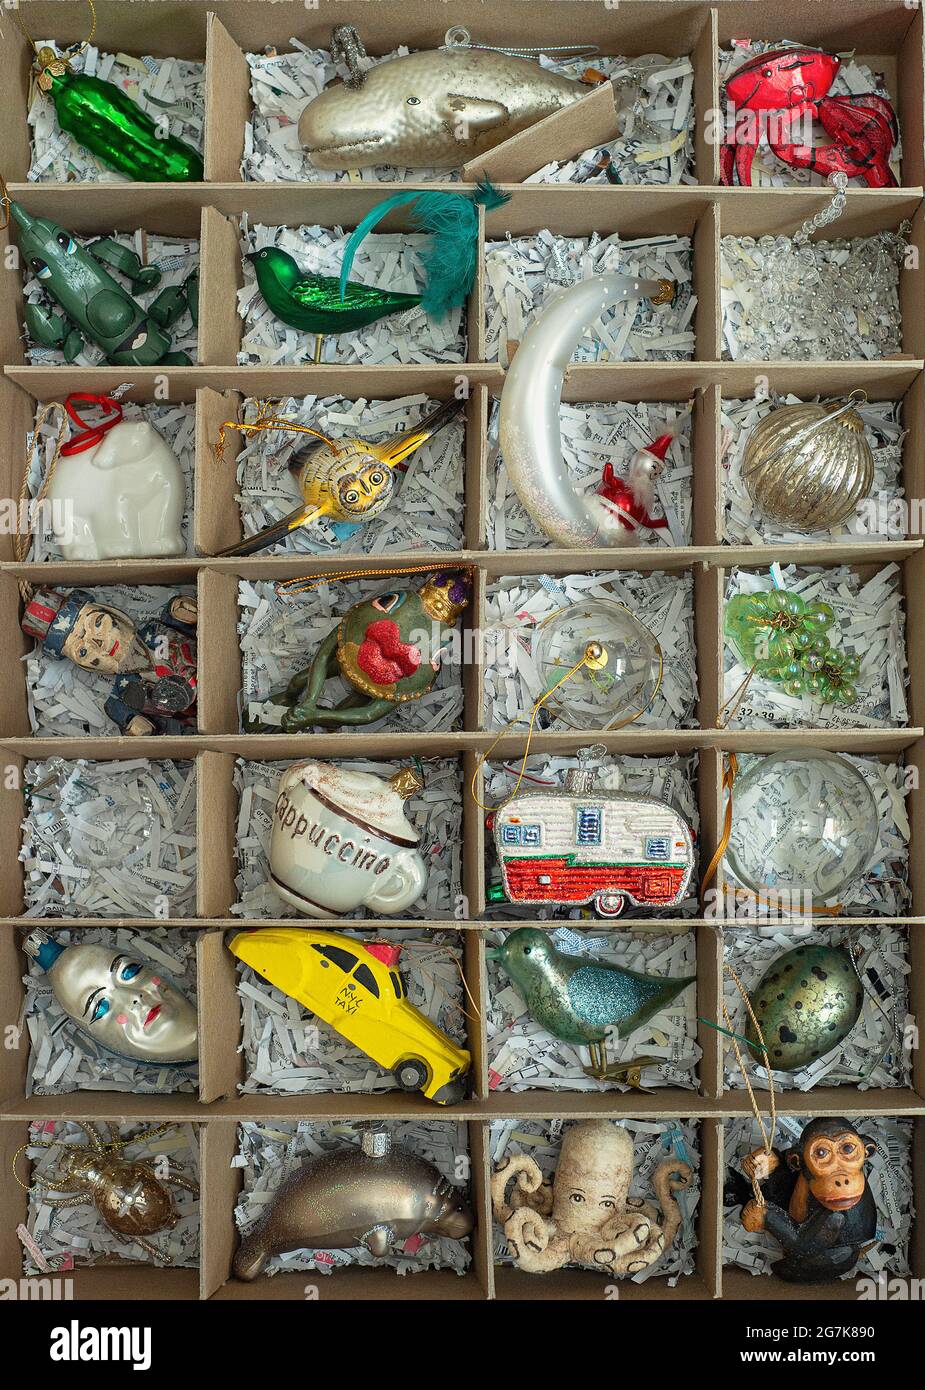 A Box of Christmas ornaments Stock Photo